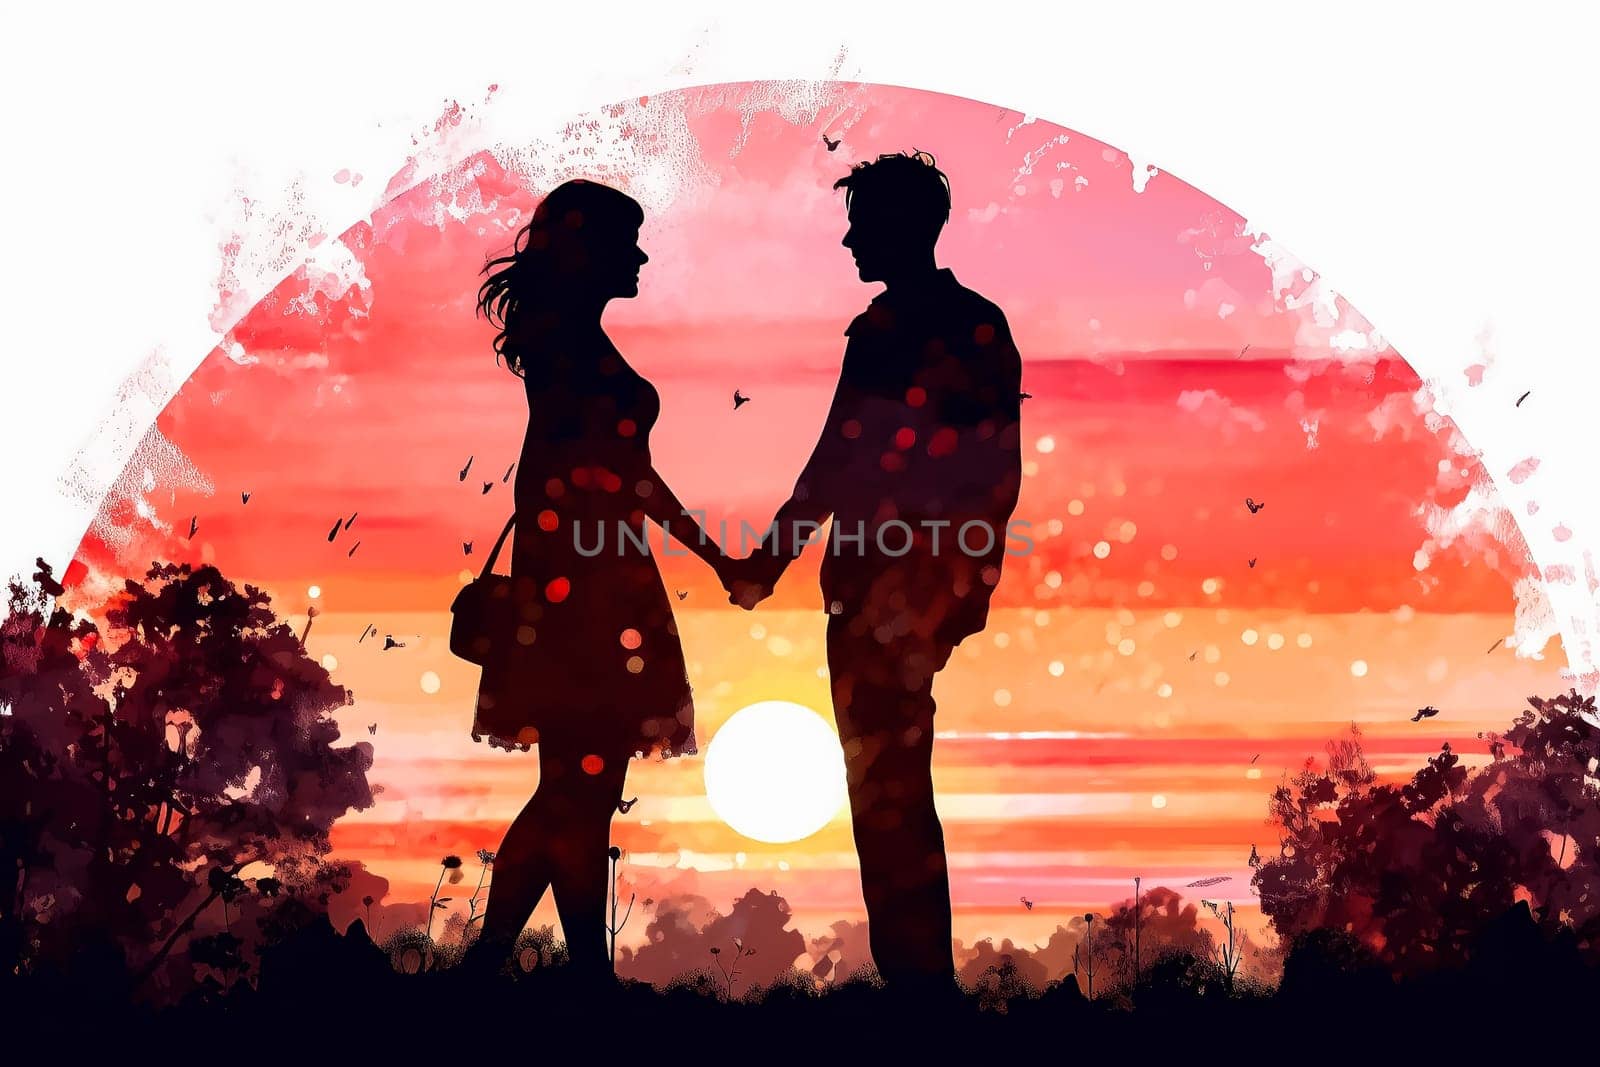 watercolor illustration, capturing a couple in a romantic date against a bright background. by Alla_Morozova93